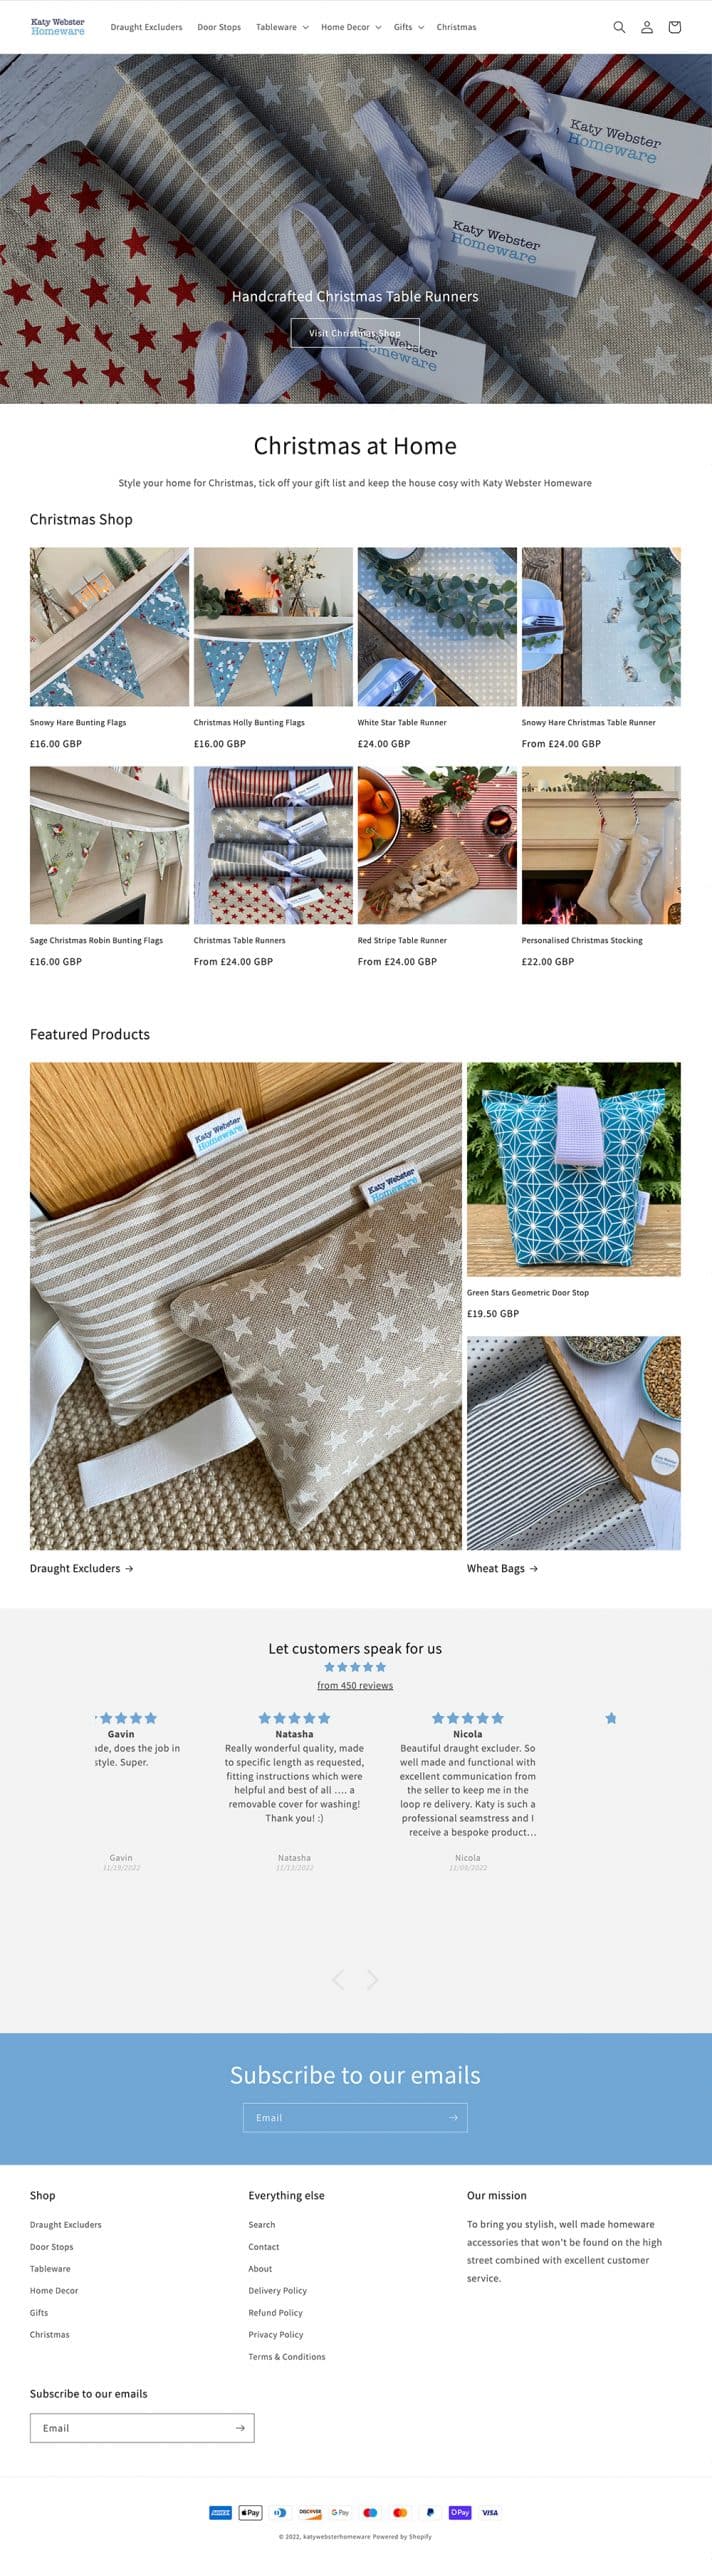 New Shopify Website for Katy Webster Homeware using Dawn Shopify theme